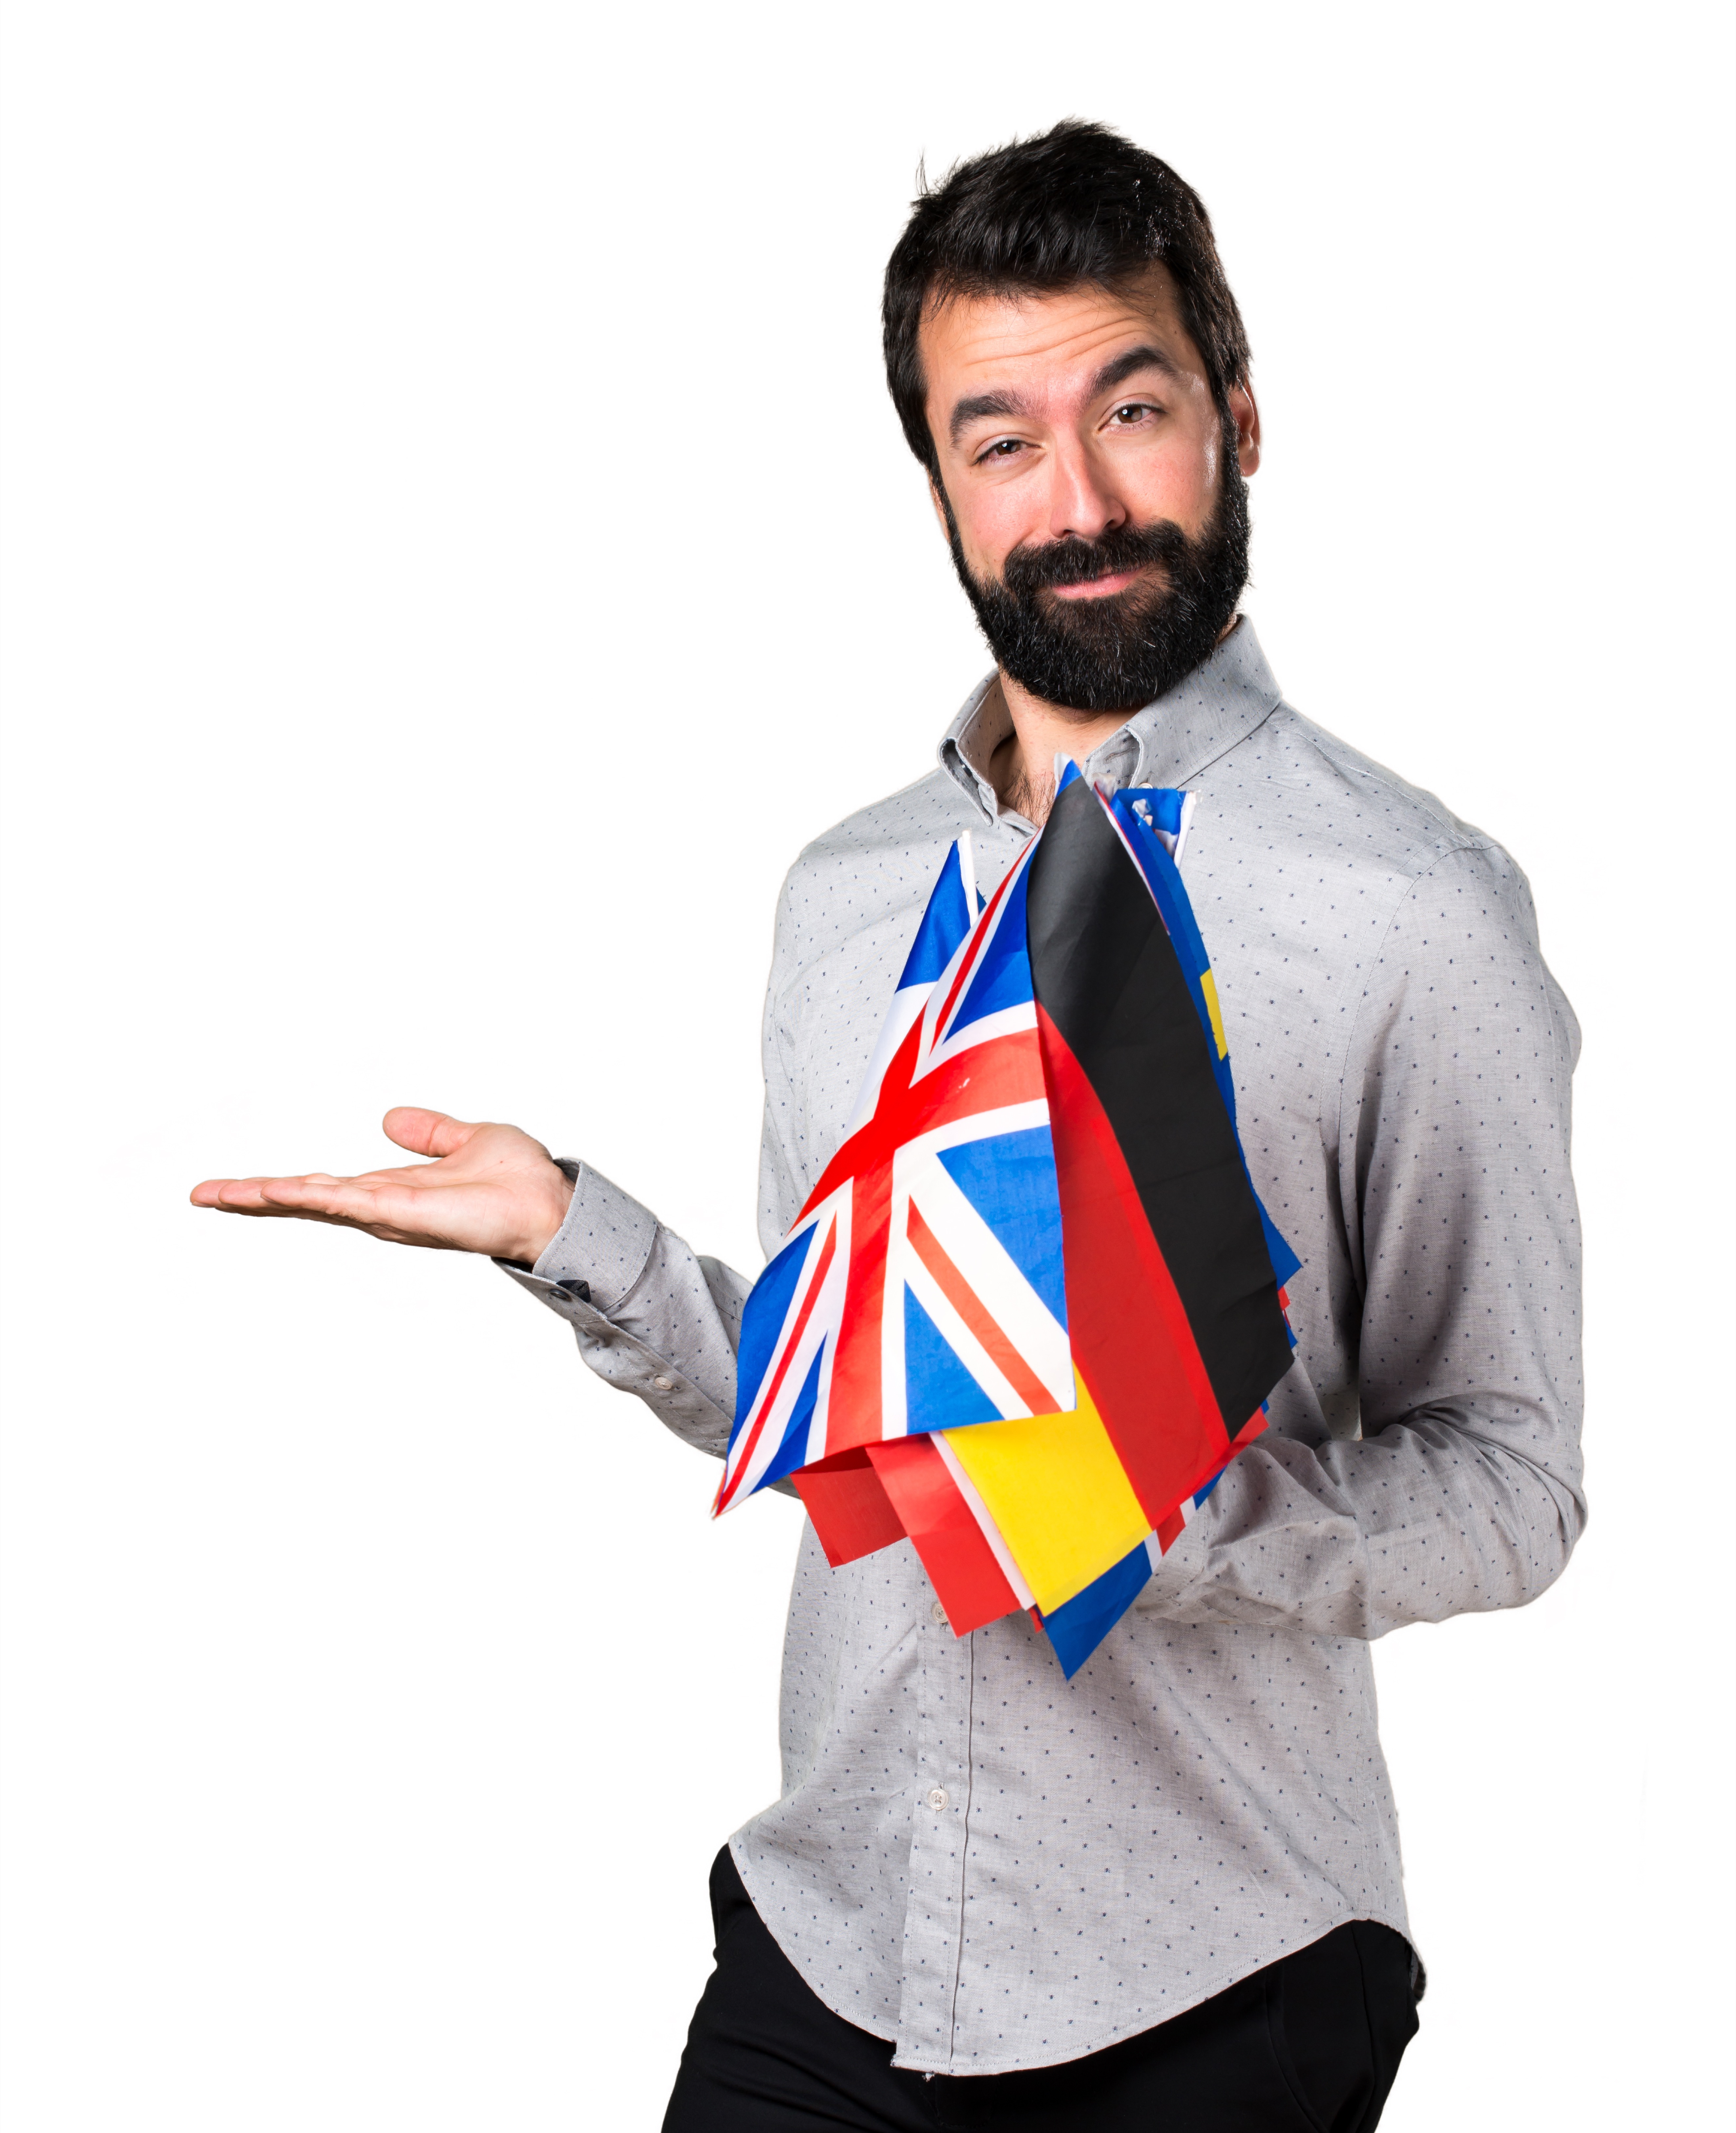 Handsome man with beard holding many flags and holding something